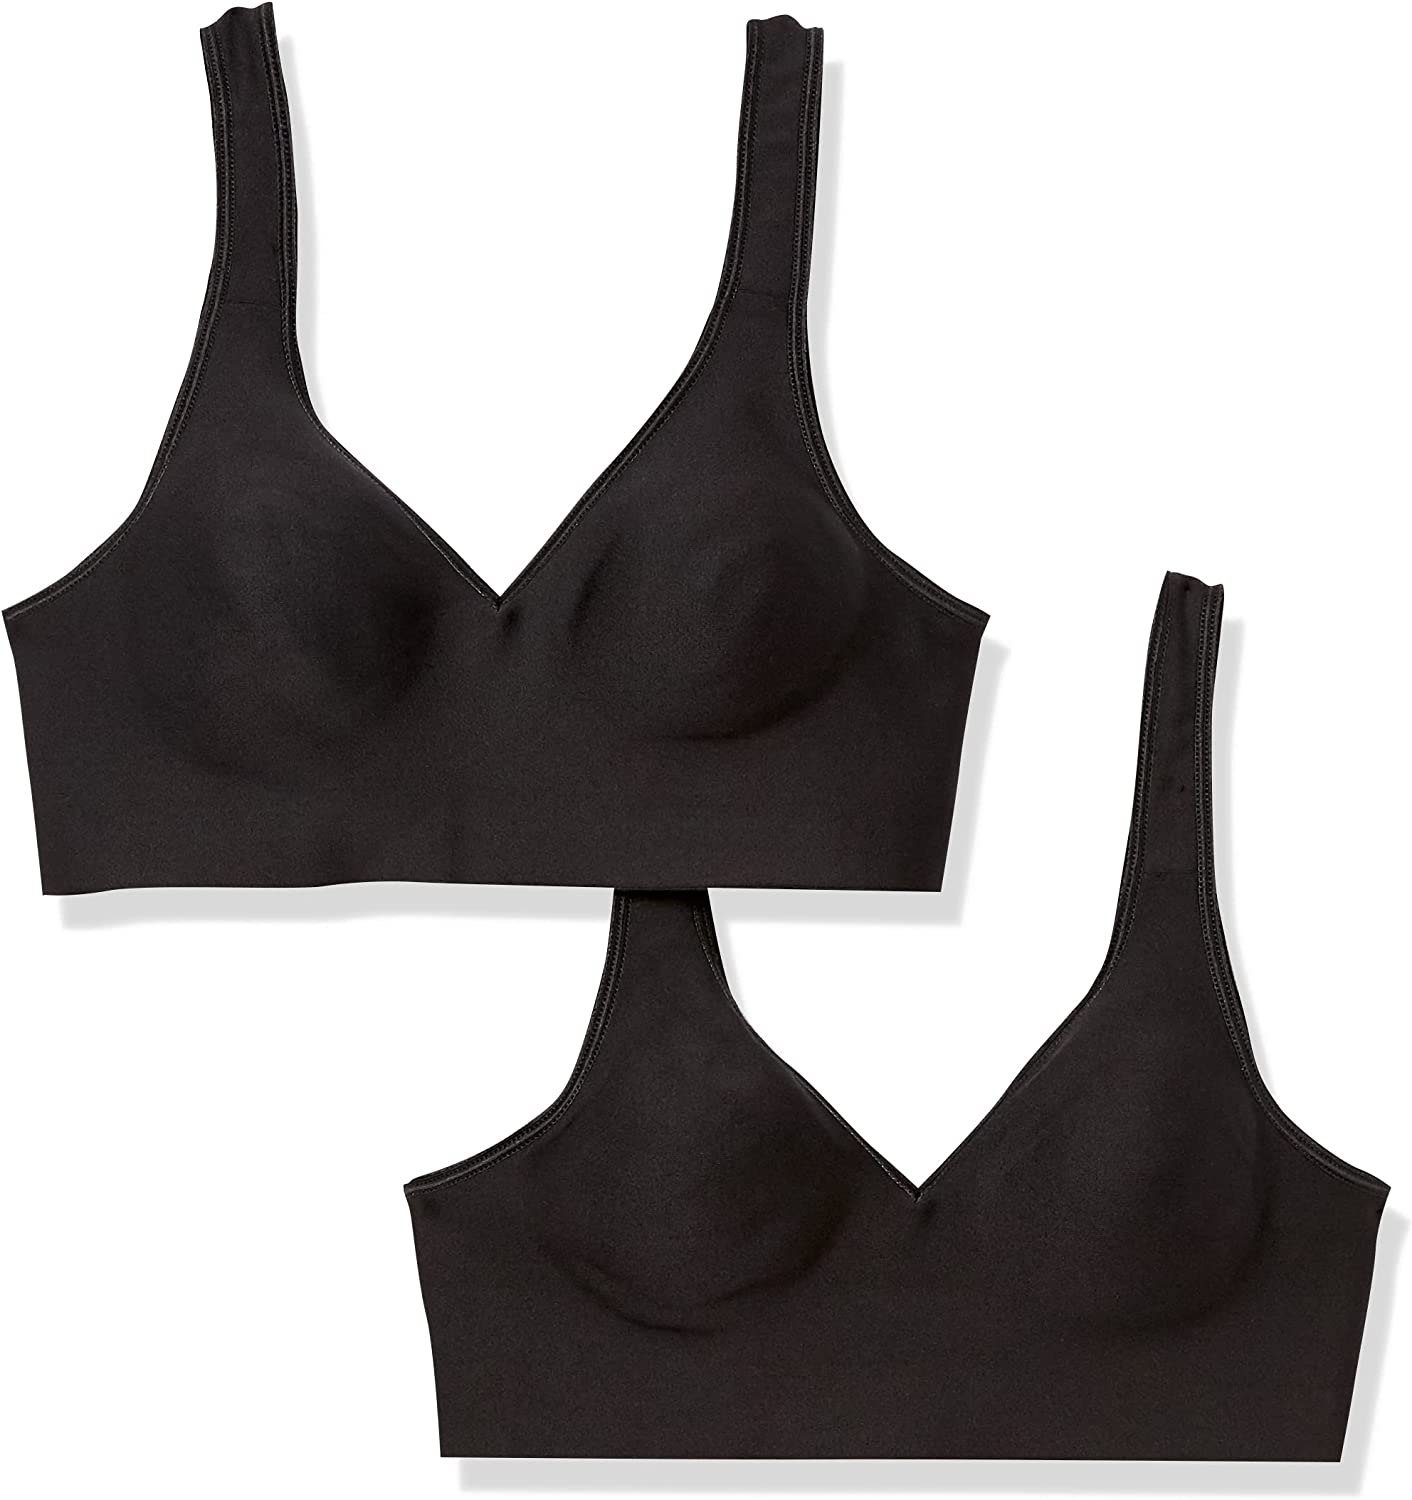 Women's SmoothTec ComfortFlex Fit Wirefree Bra MHG796, Available in Single and 2-Pack